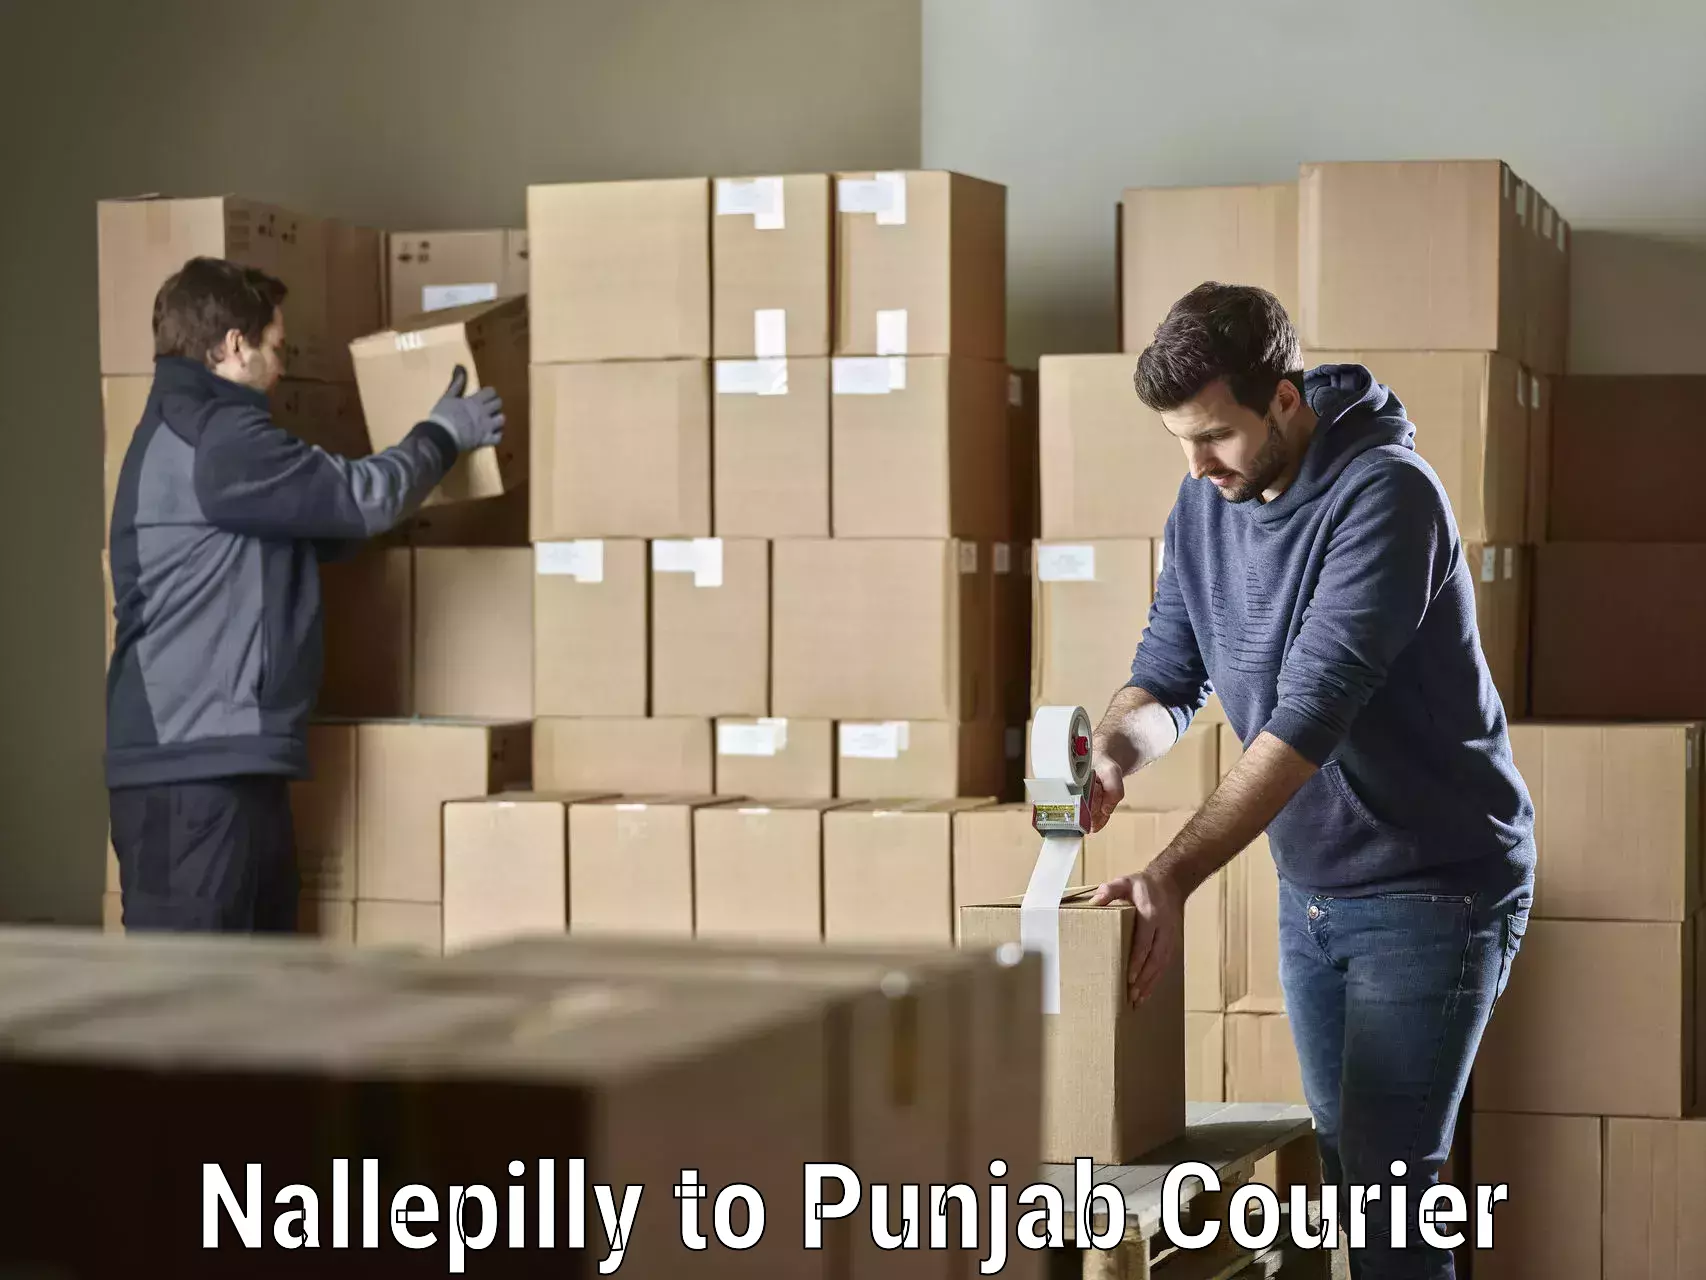 Flexible delivery schedules Nallepilly to Central University of Punjab Bathinda